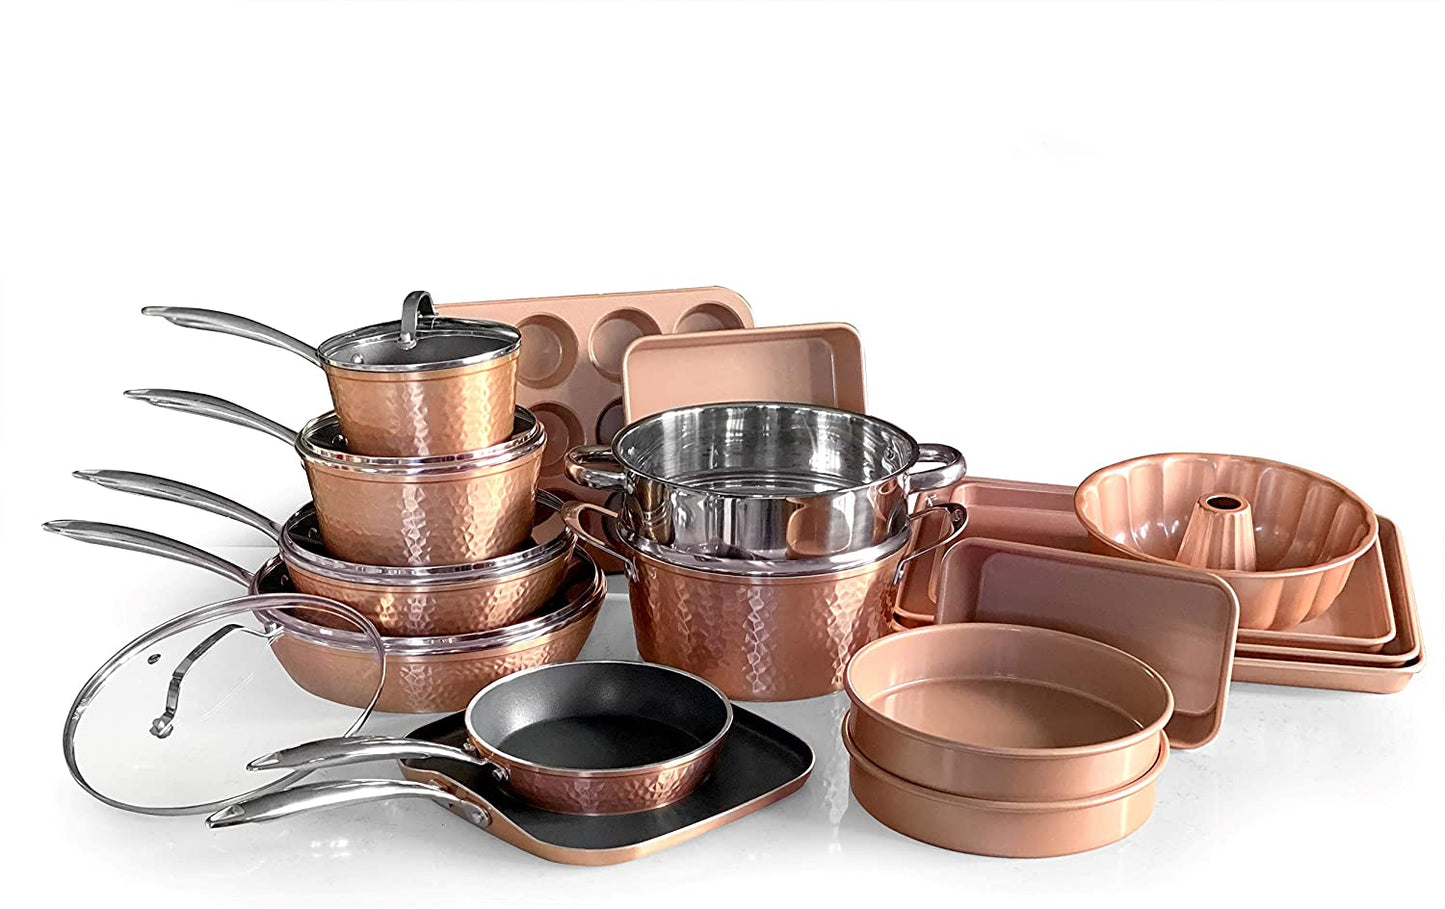 Orgreenic orgreenic rose hammered cookware collection - 10 piece set with  lids - non-stick ceramic for even heating